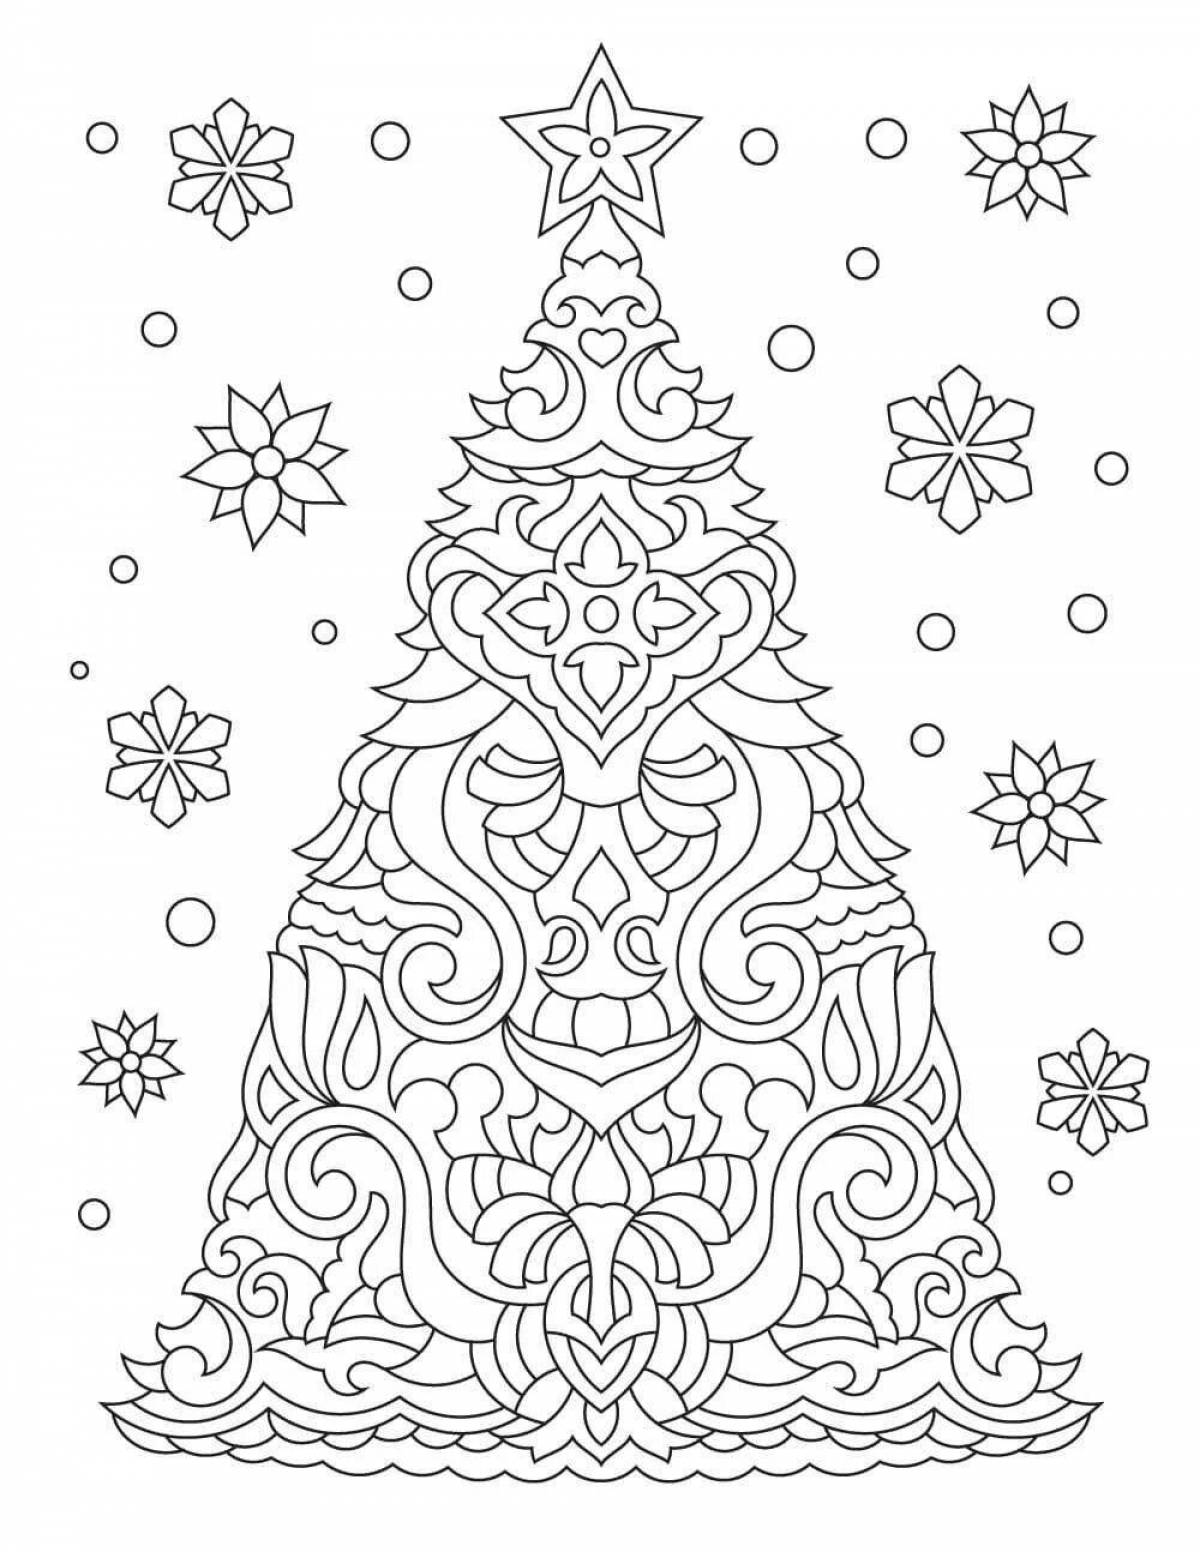 Color crazy christmas tree coloring book for girls